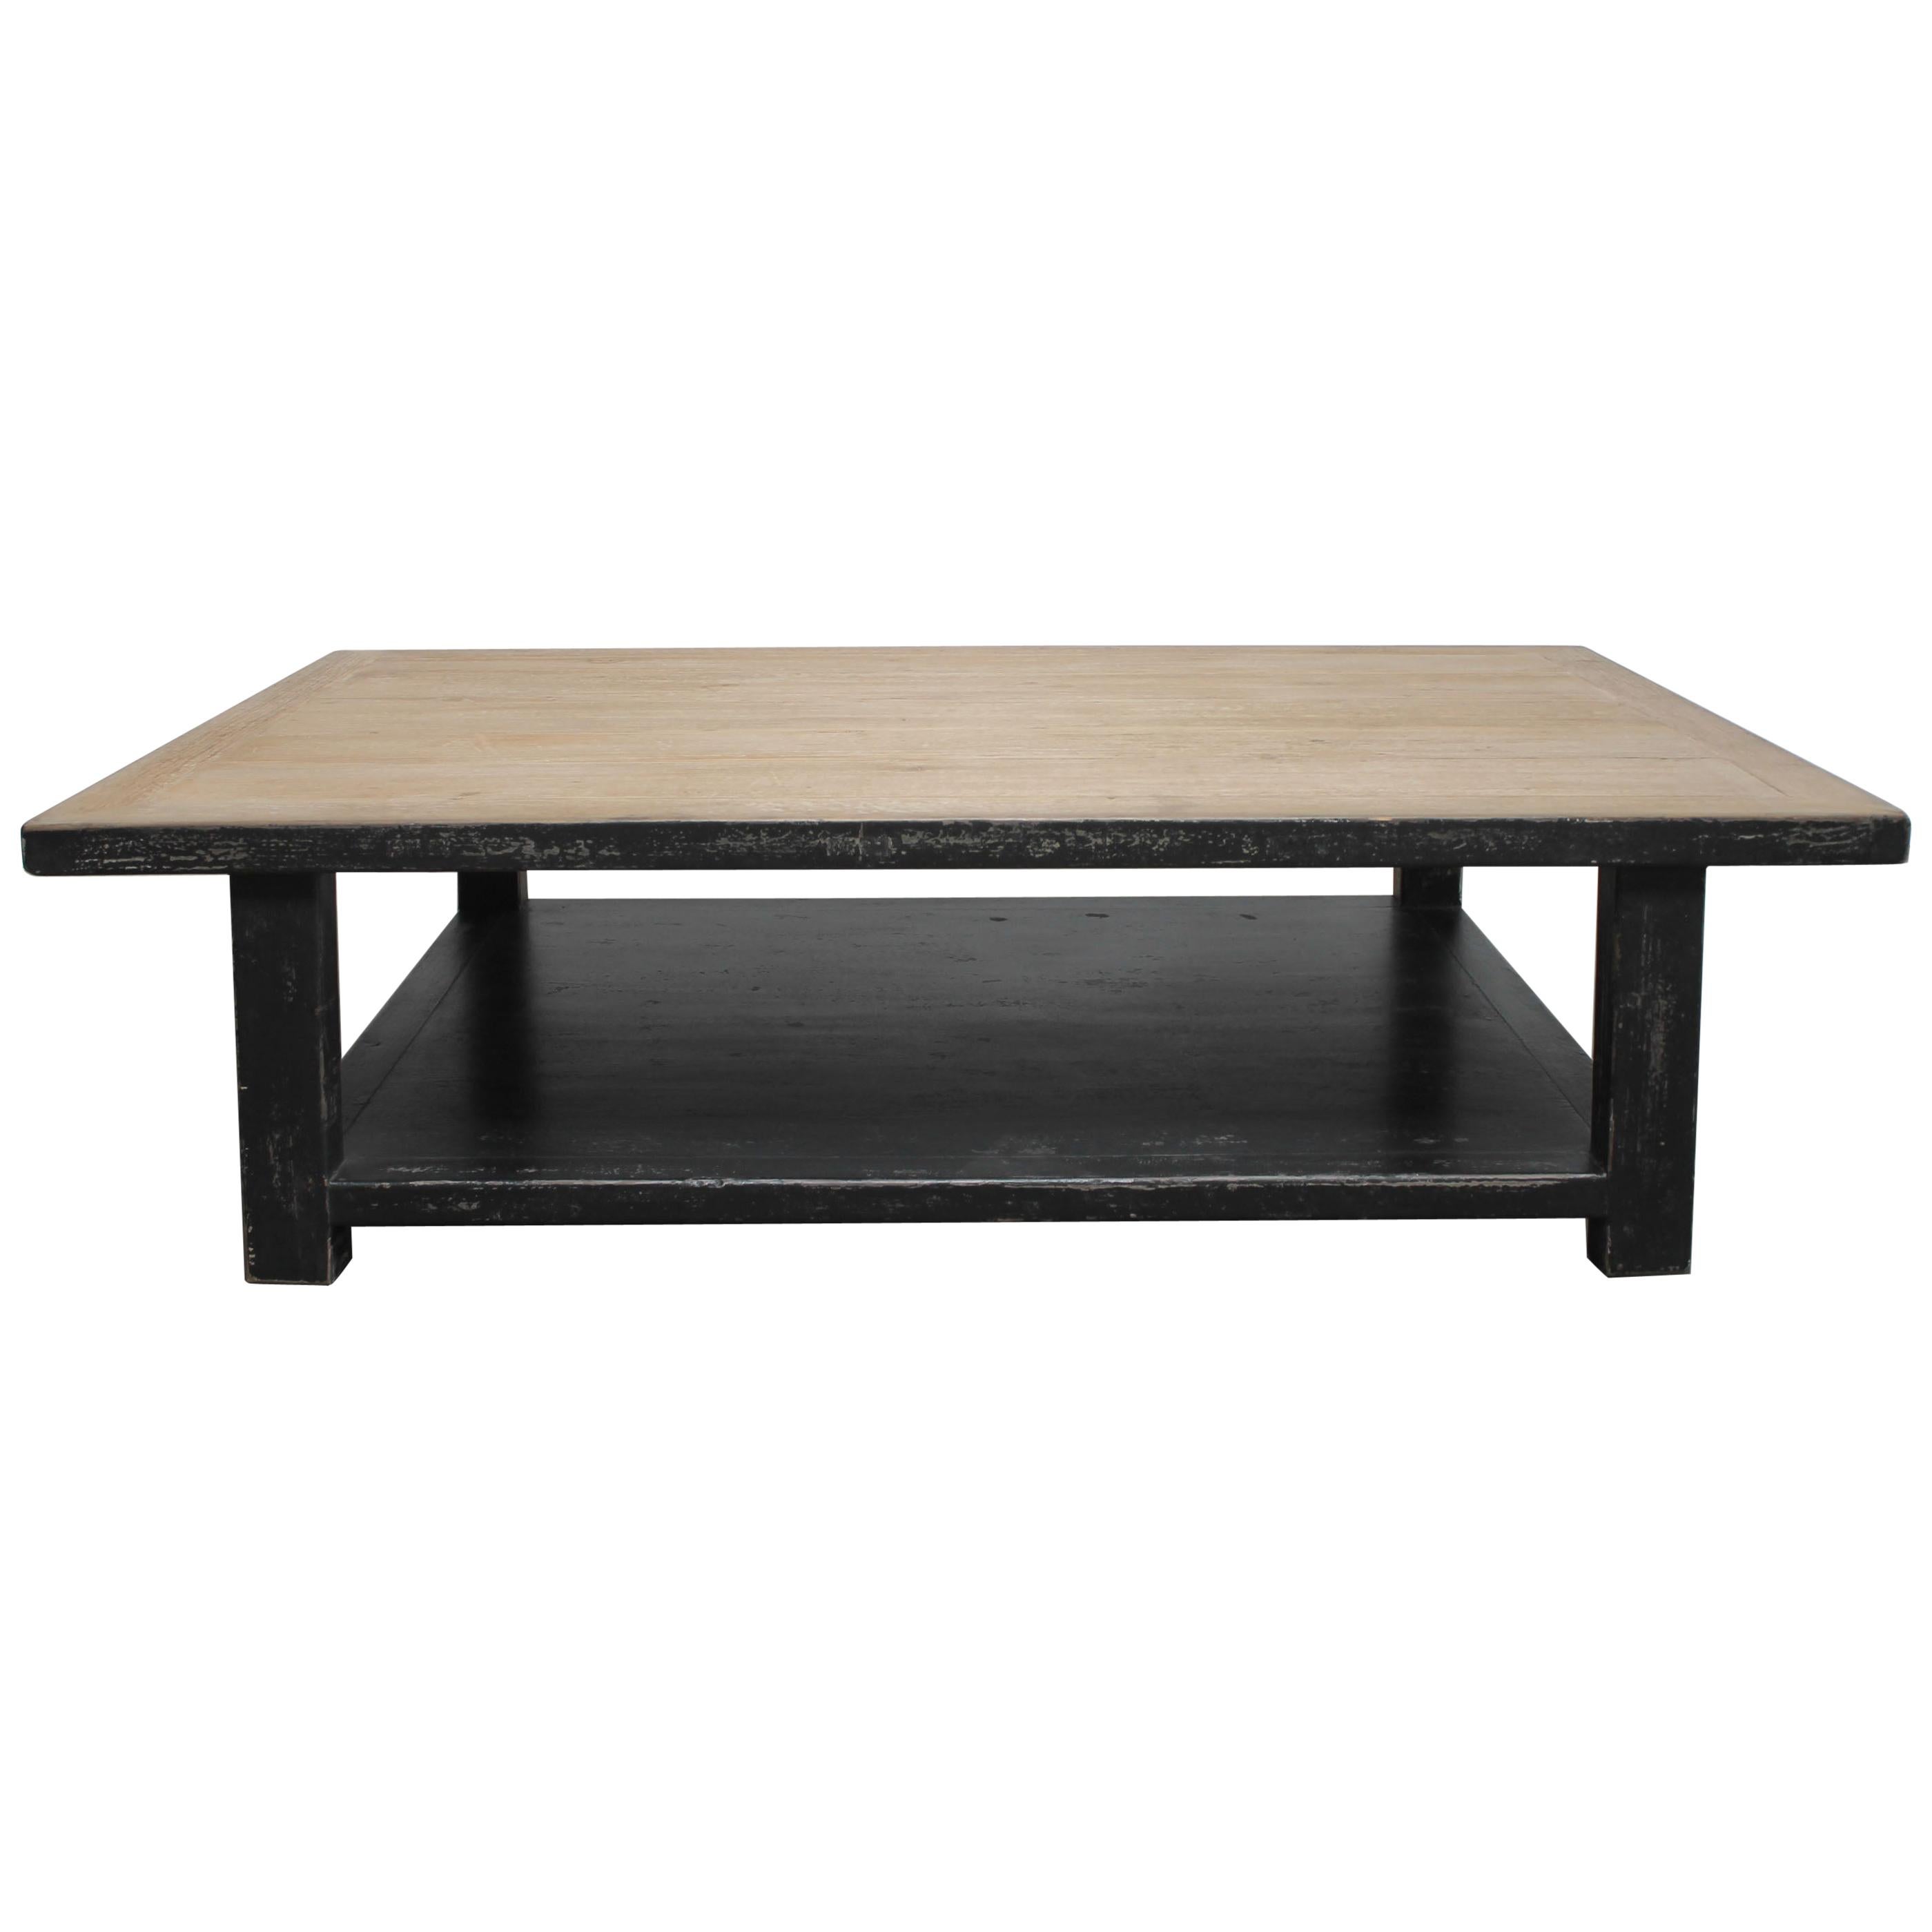 Large Reclaimed Pine Wood Coffee Table with Distressed Black Finish